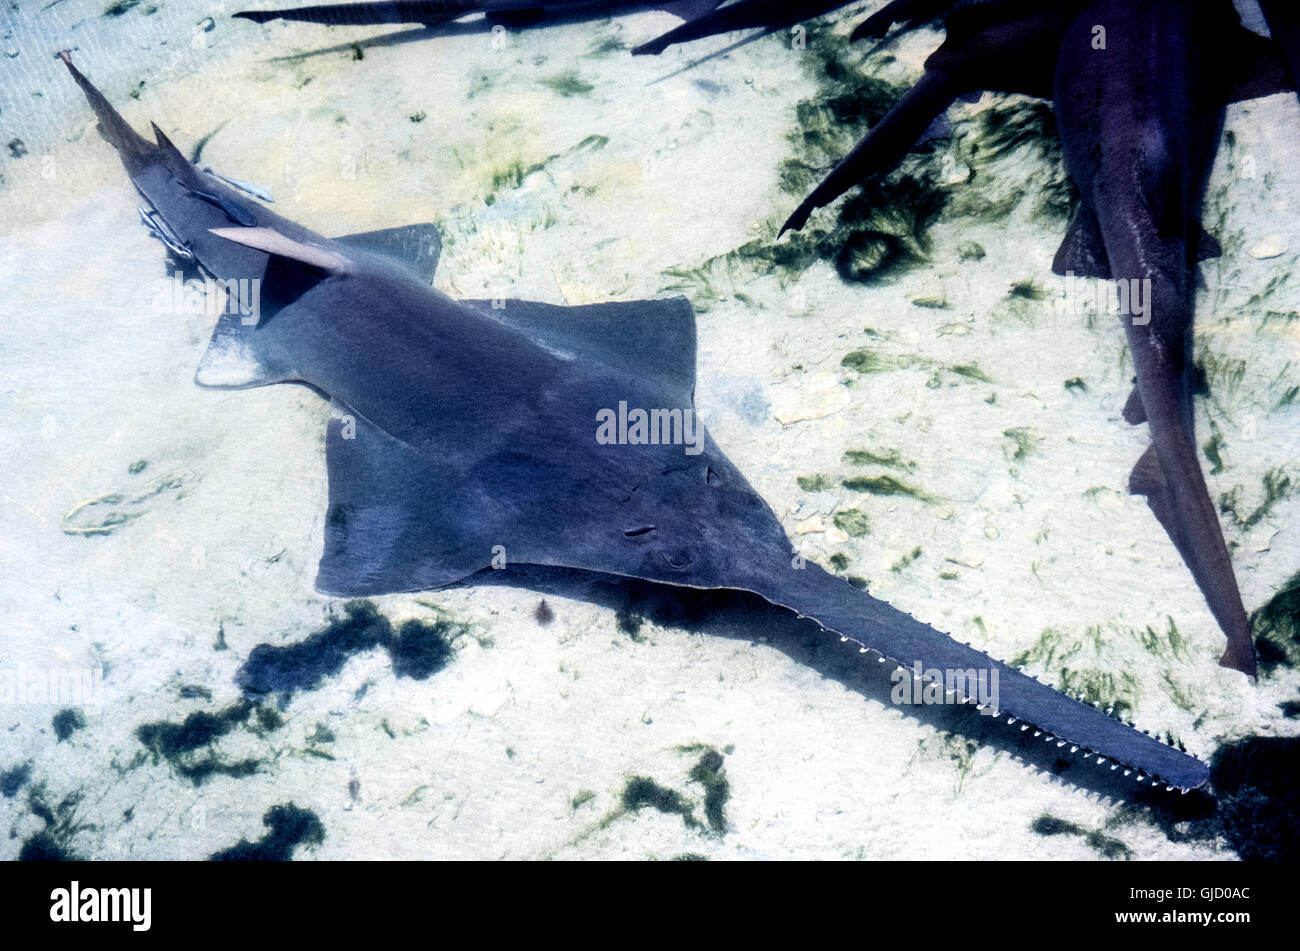 The sawfish is named for its flat elongated snout with serrated edges that resemble large teeth on two edges of a saw blade. Also known as a carpenter shark, this member of the ray family uses its extended nose to slash at swimming prey and also to dig up crustaceans from the sea floor where the flat-bodied marine animal spends most of its time. Stock Photo